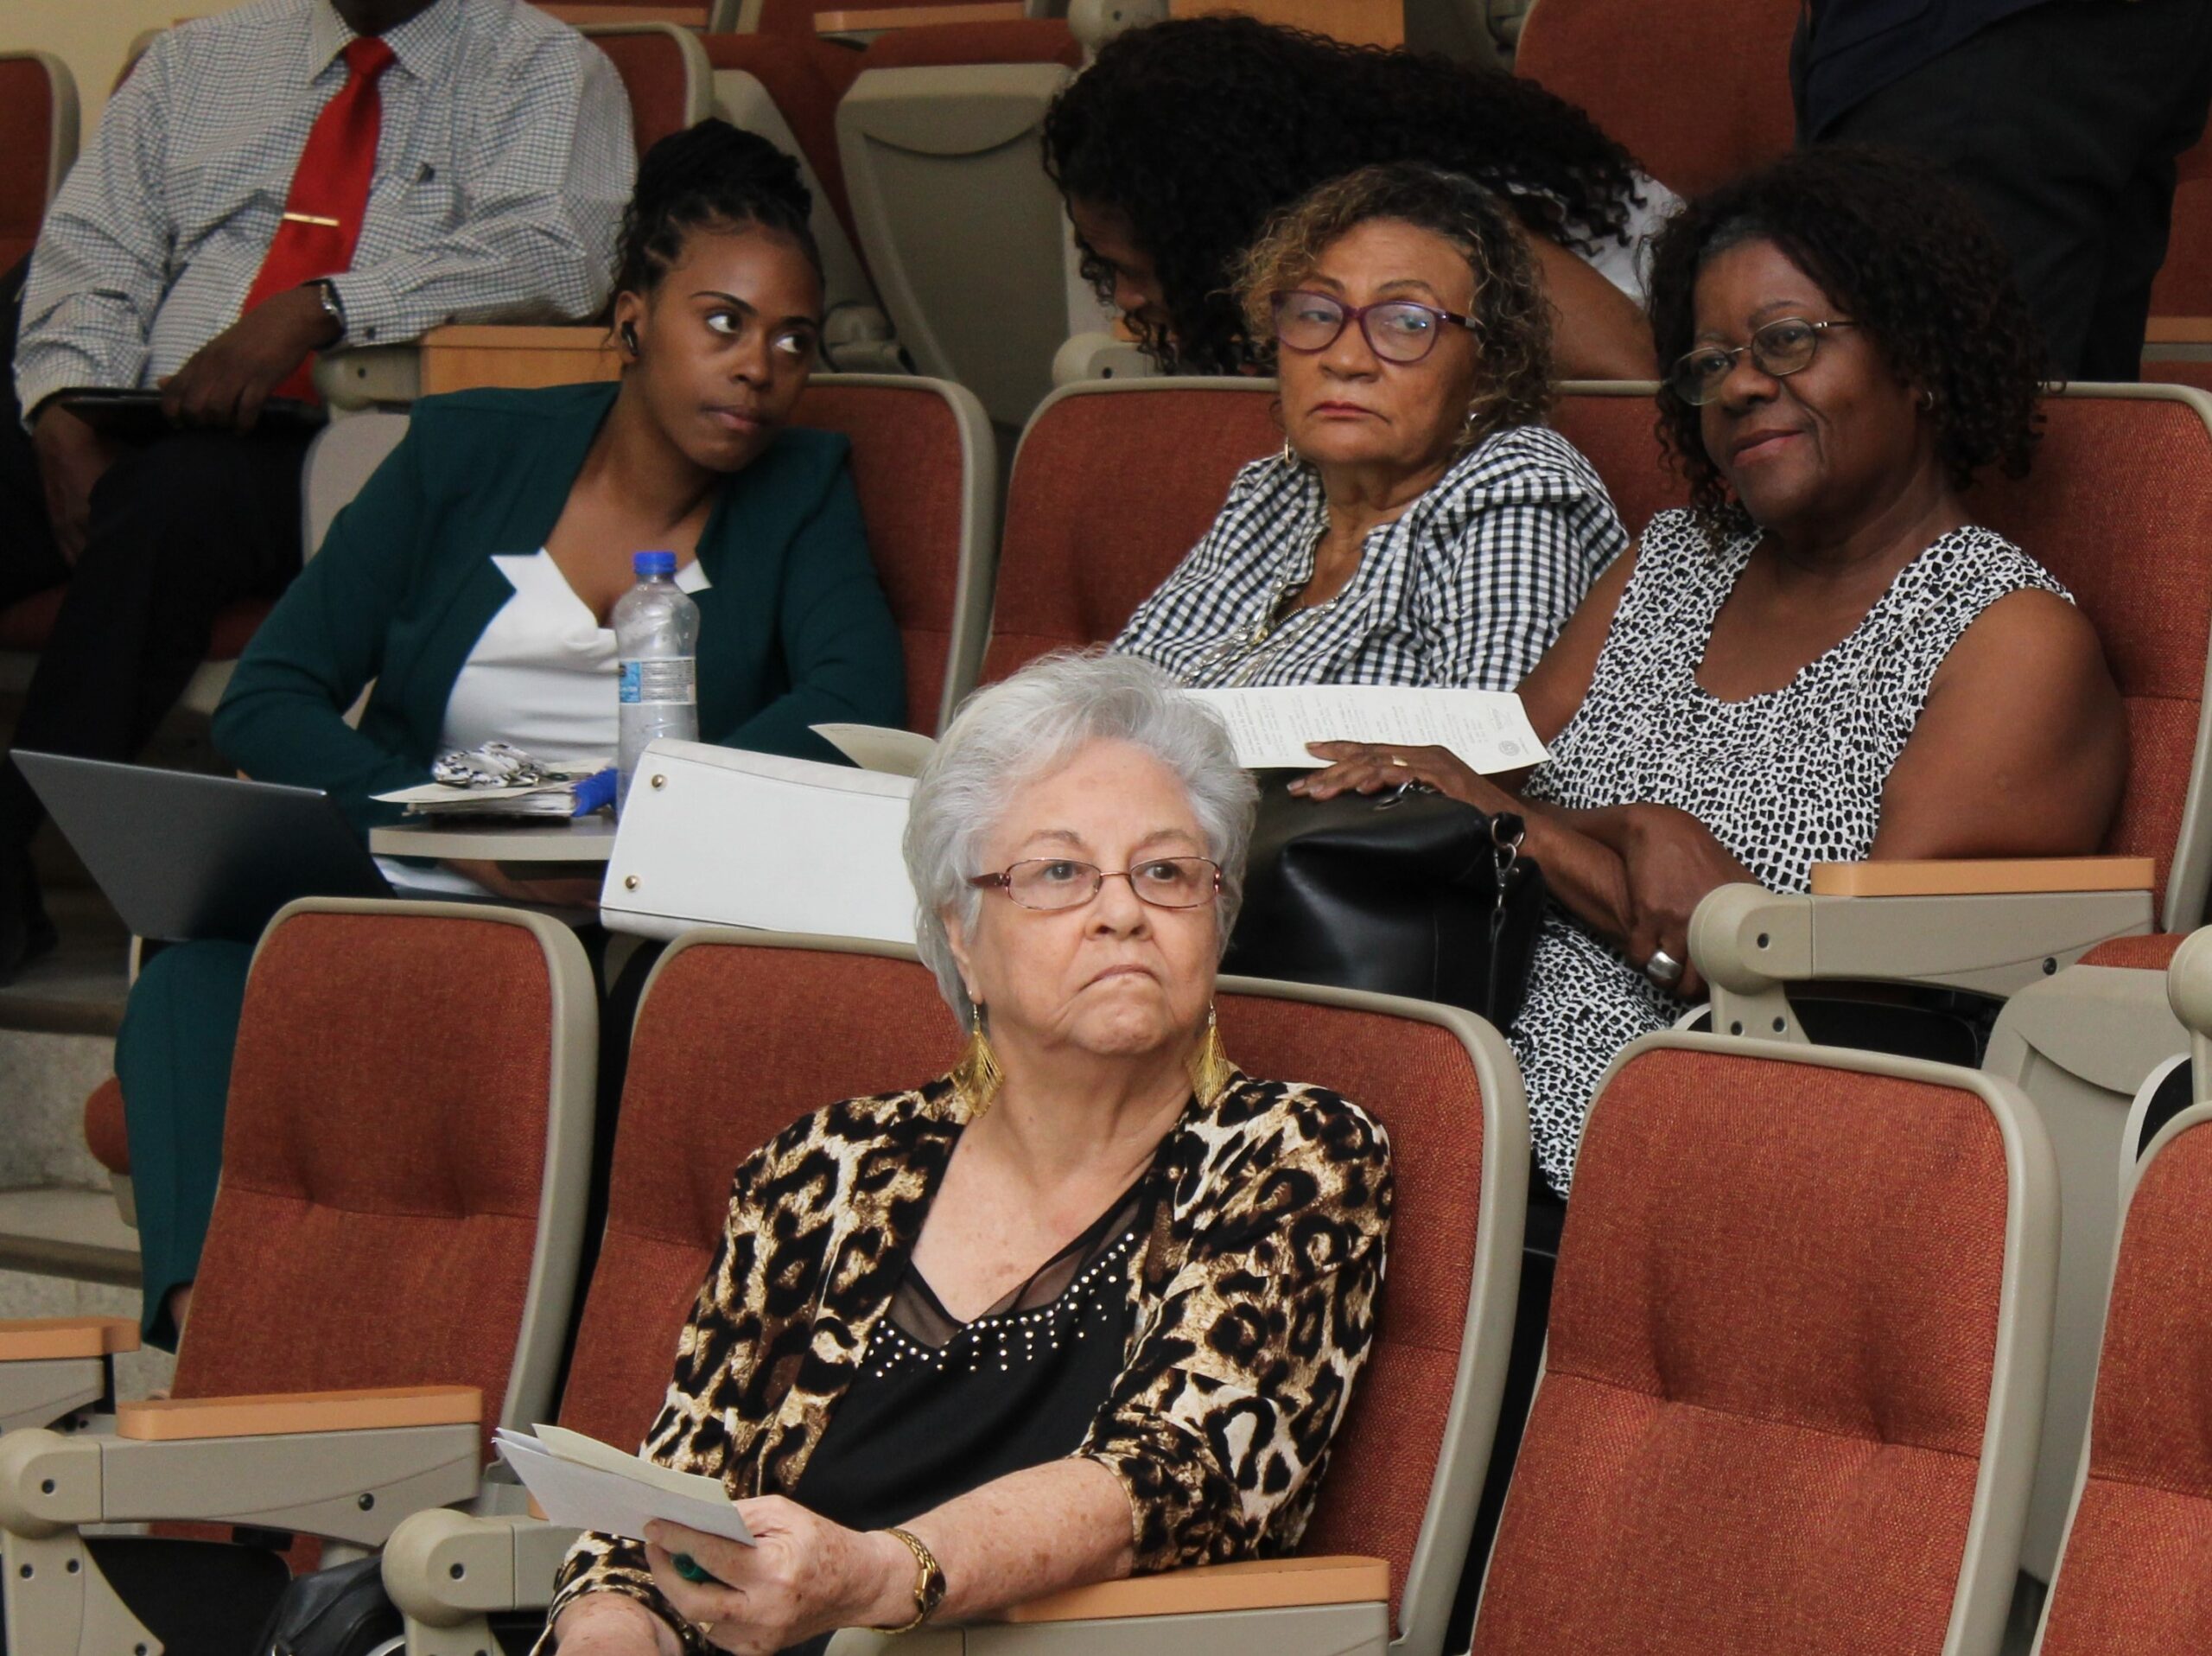 Mrs. Hillary Pamela Kelly (center) in attendance watching the proceeding of her 10th annual distinguished lecture. Photo by Gabriel Lewin